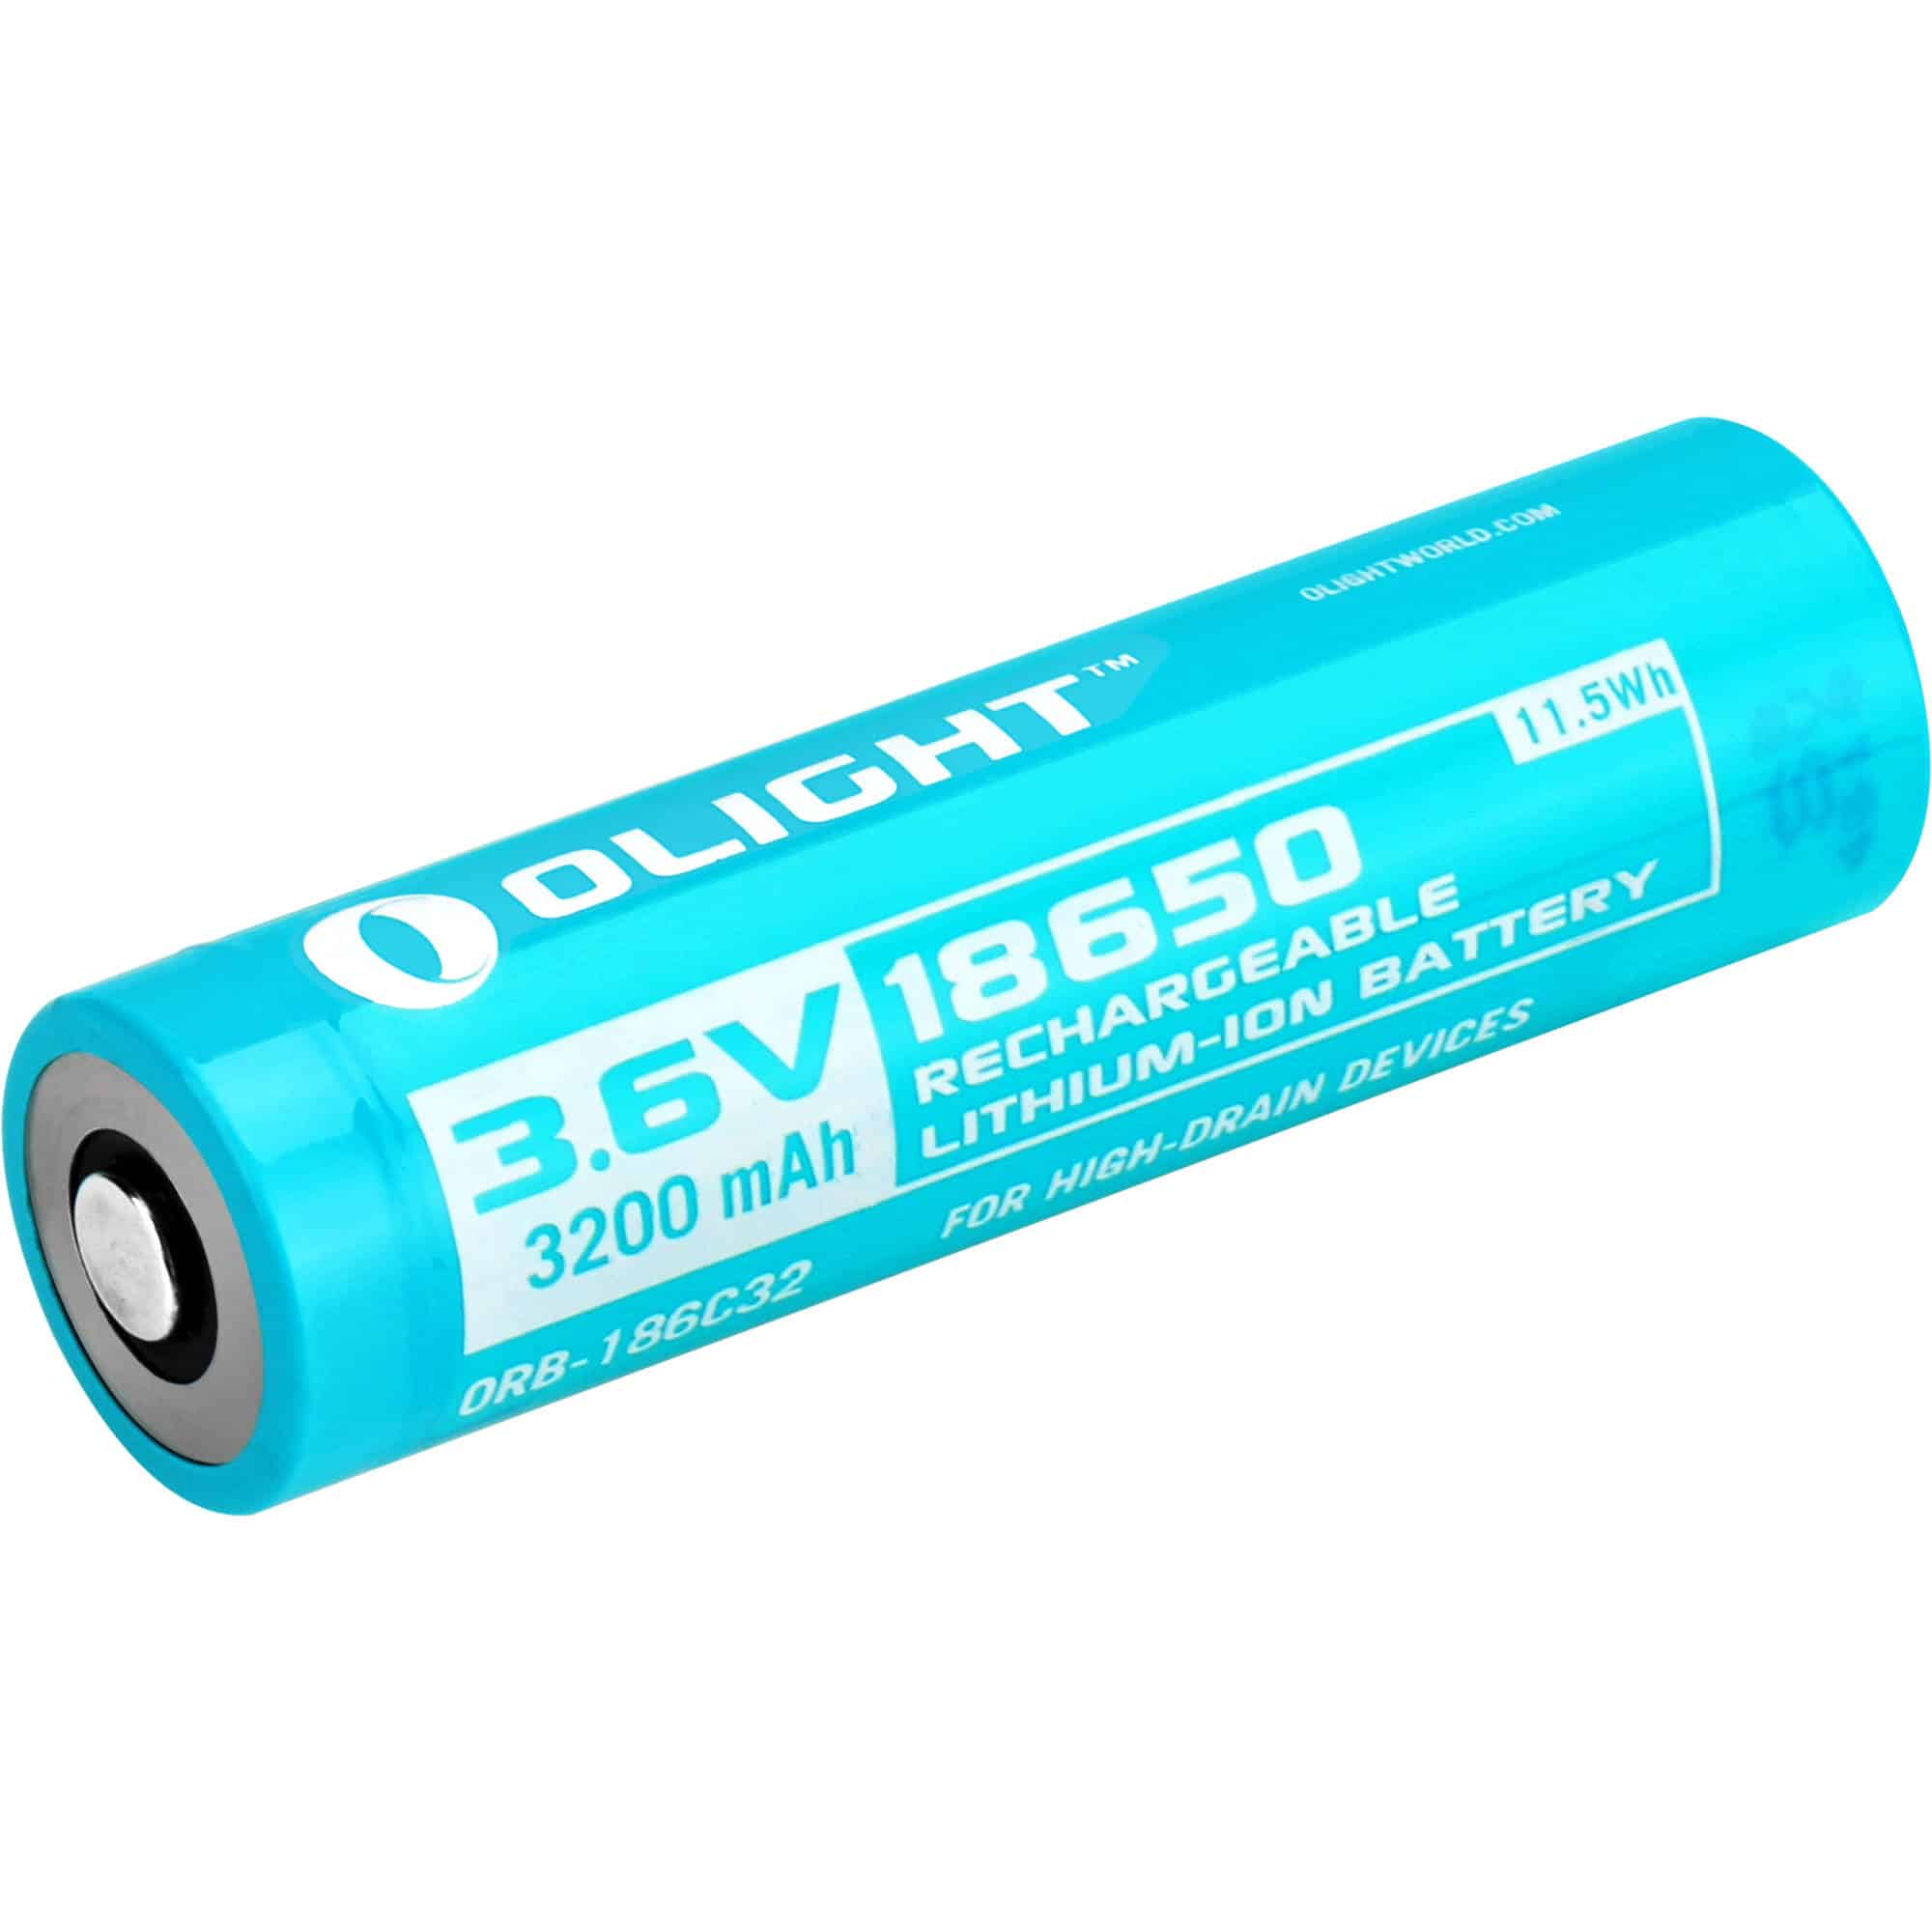 Olight 186C35 Customized Rechargeable Battery (186C32-customized)